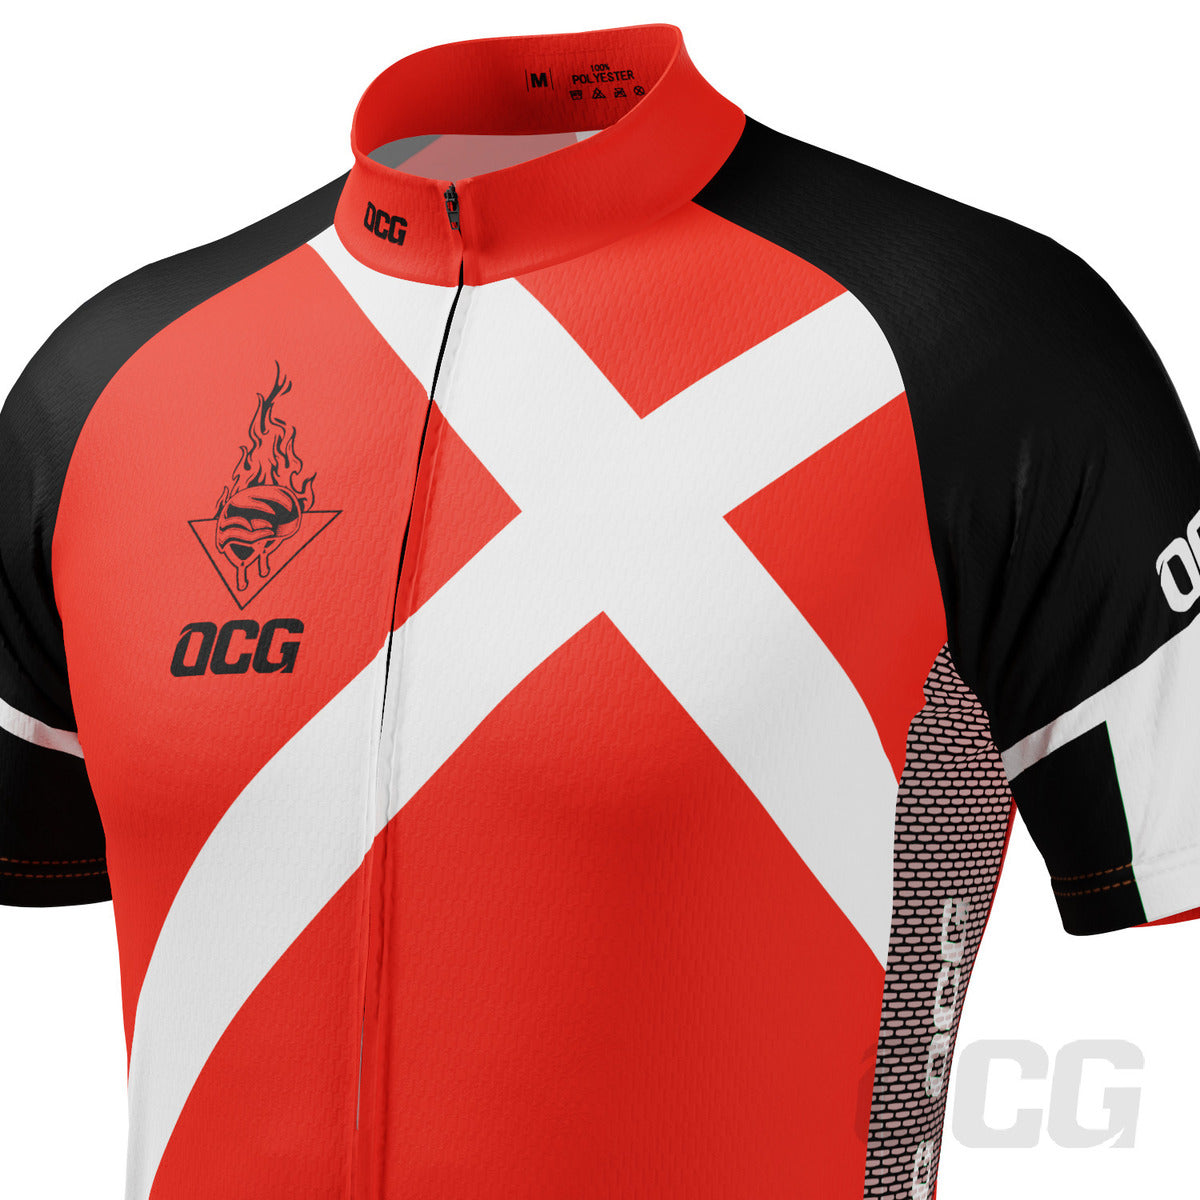 Men's Marching In Short Sleeve Cycling Jersey